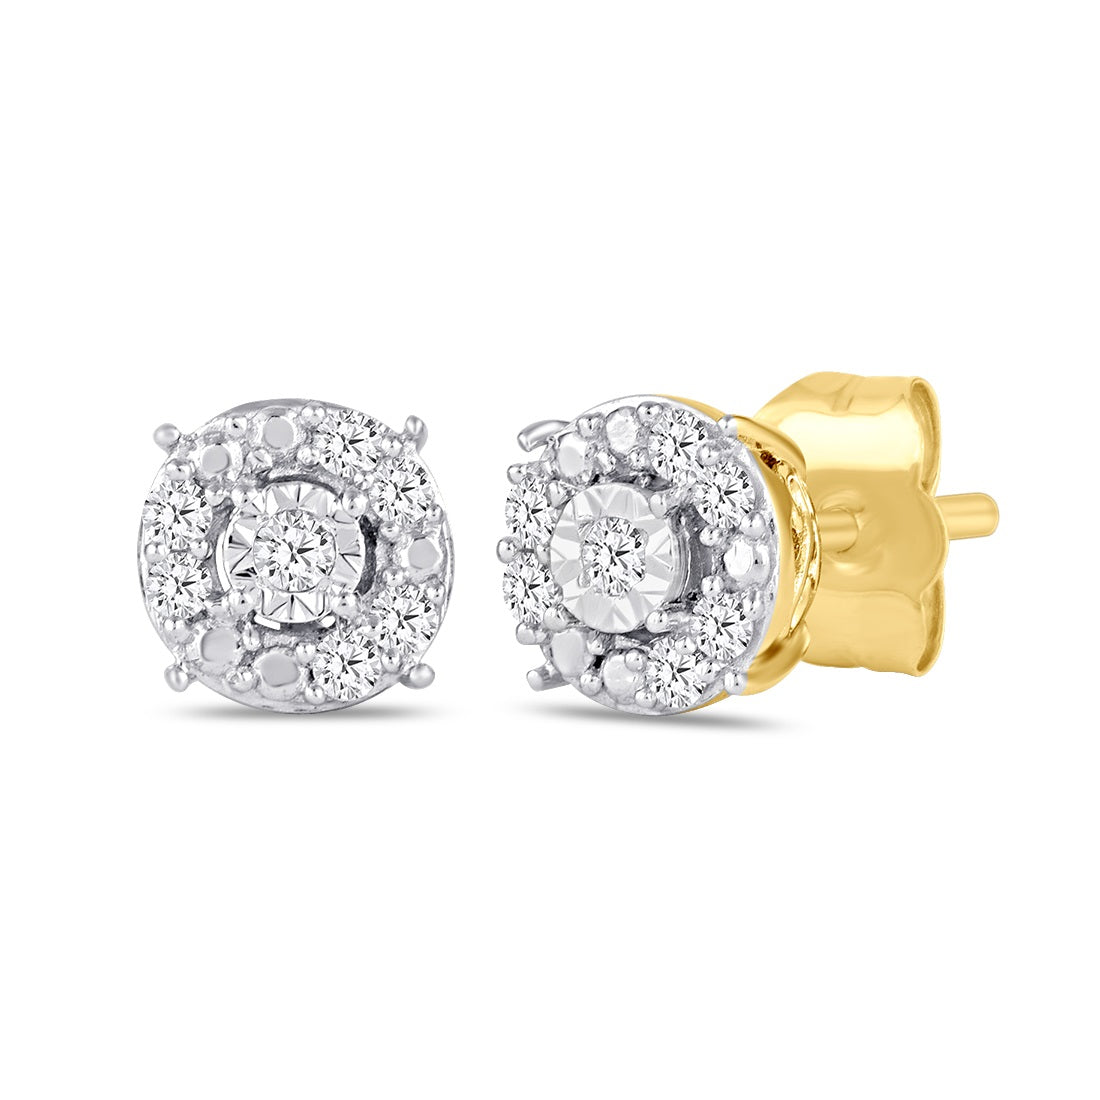 Tia Miracle Halo Earrings with 0.10ct of Diamonds in 9ct Yellow Gold Earrings Bevilles 